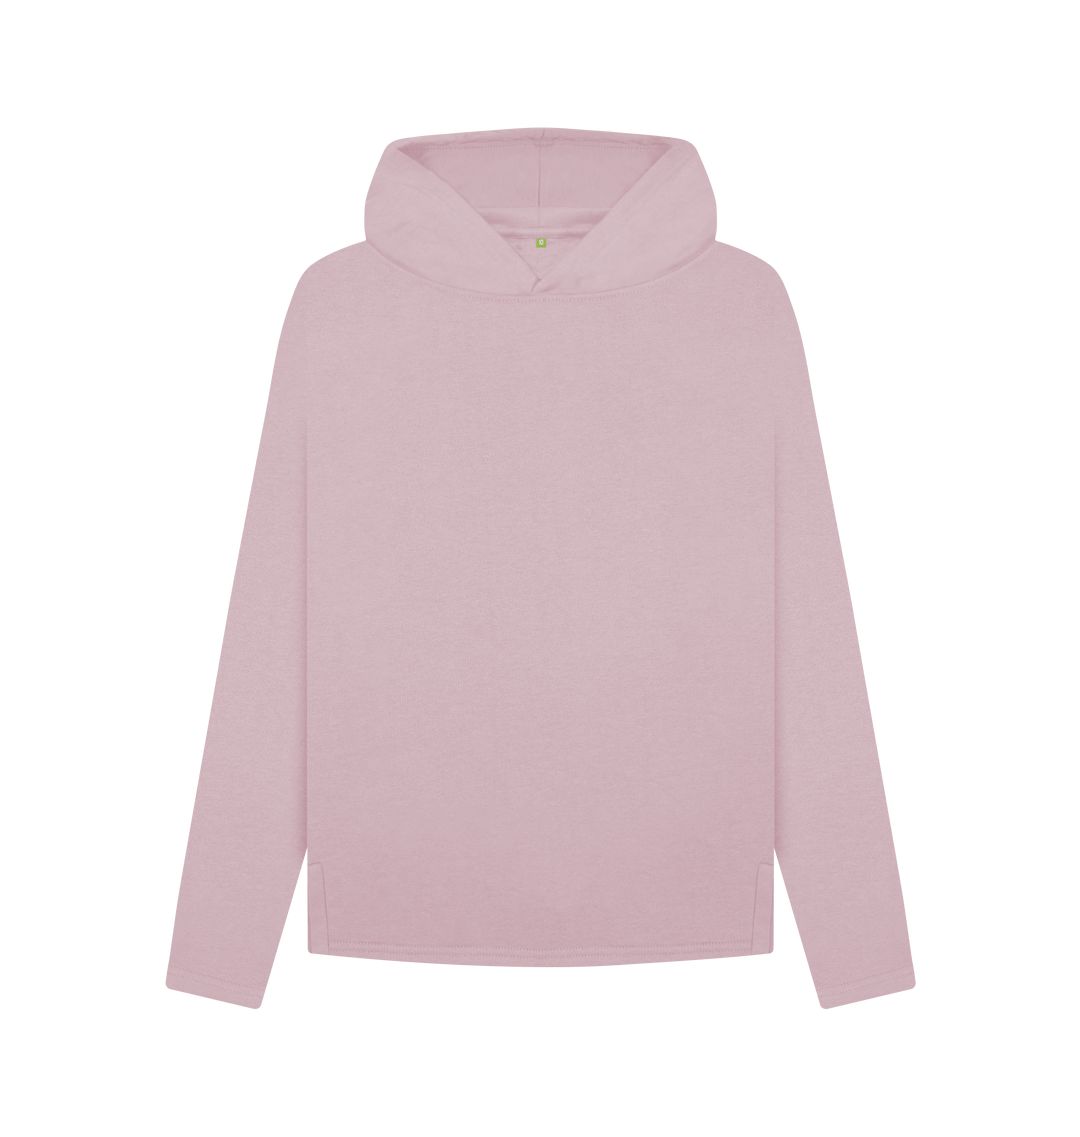 Mauve Women's organic cotton relaxed fit hoodie